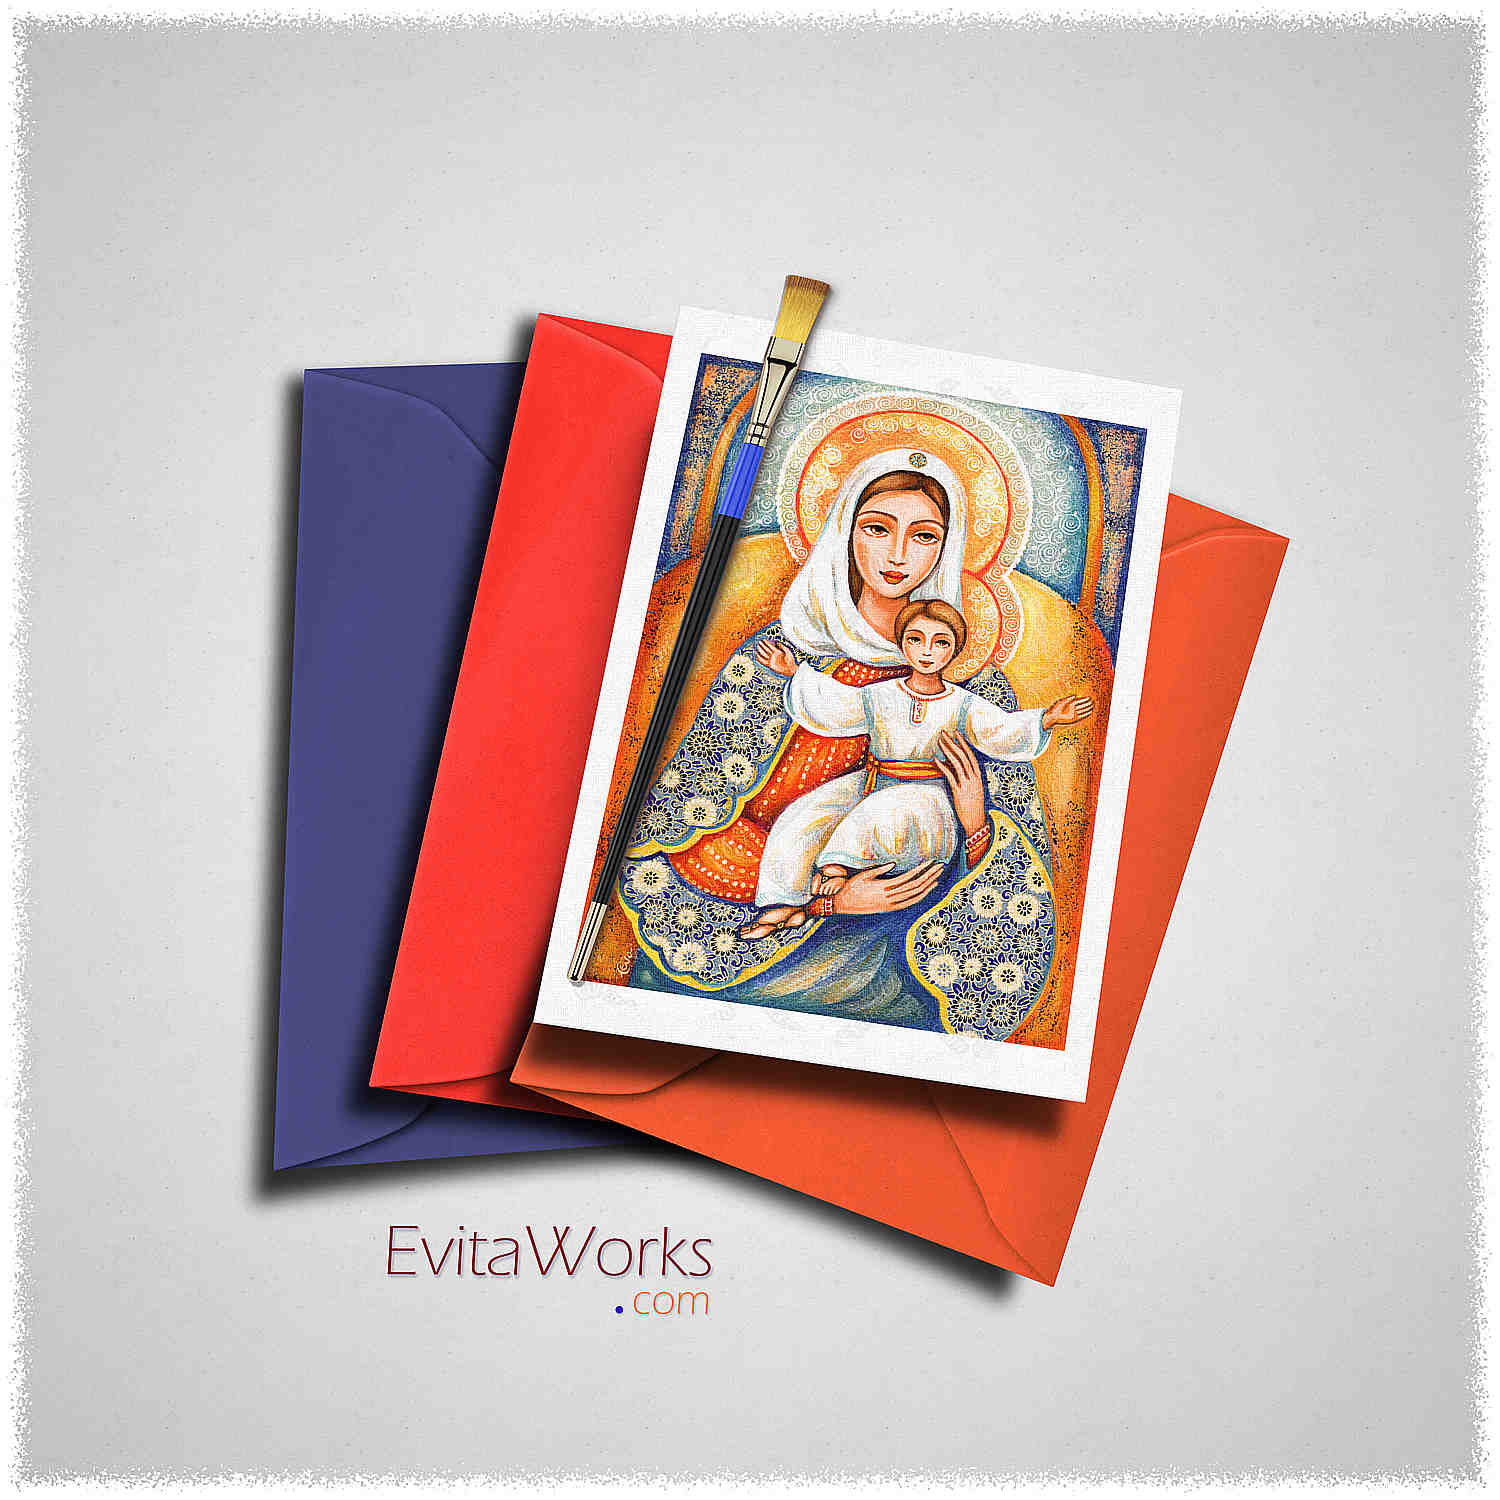 Hit to learn about "Heavenly Grace, Madonna and Child" on cards